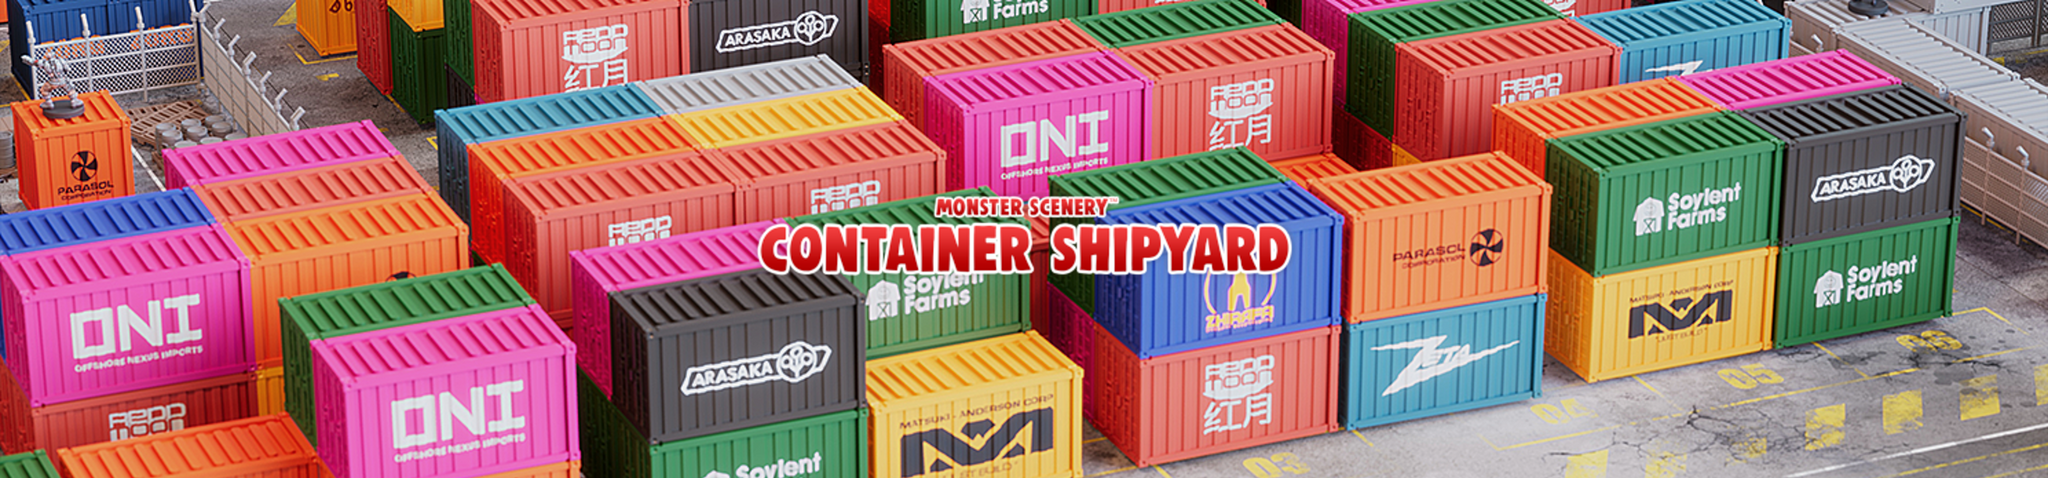 Monster Scenery™: The Container Shipyard